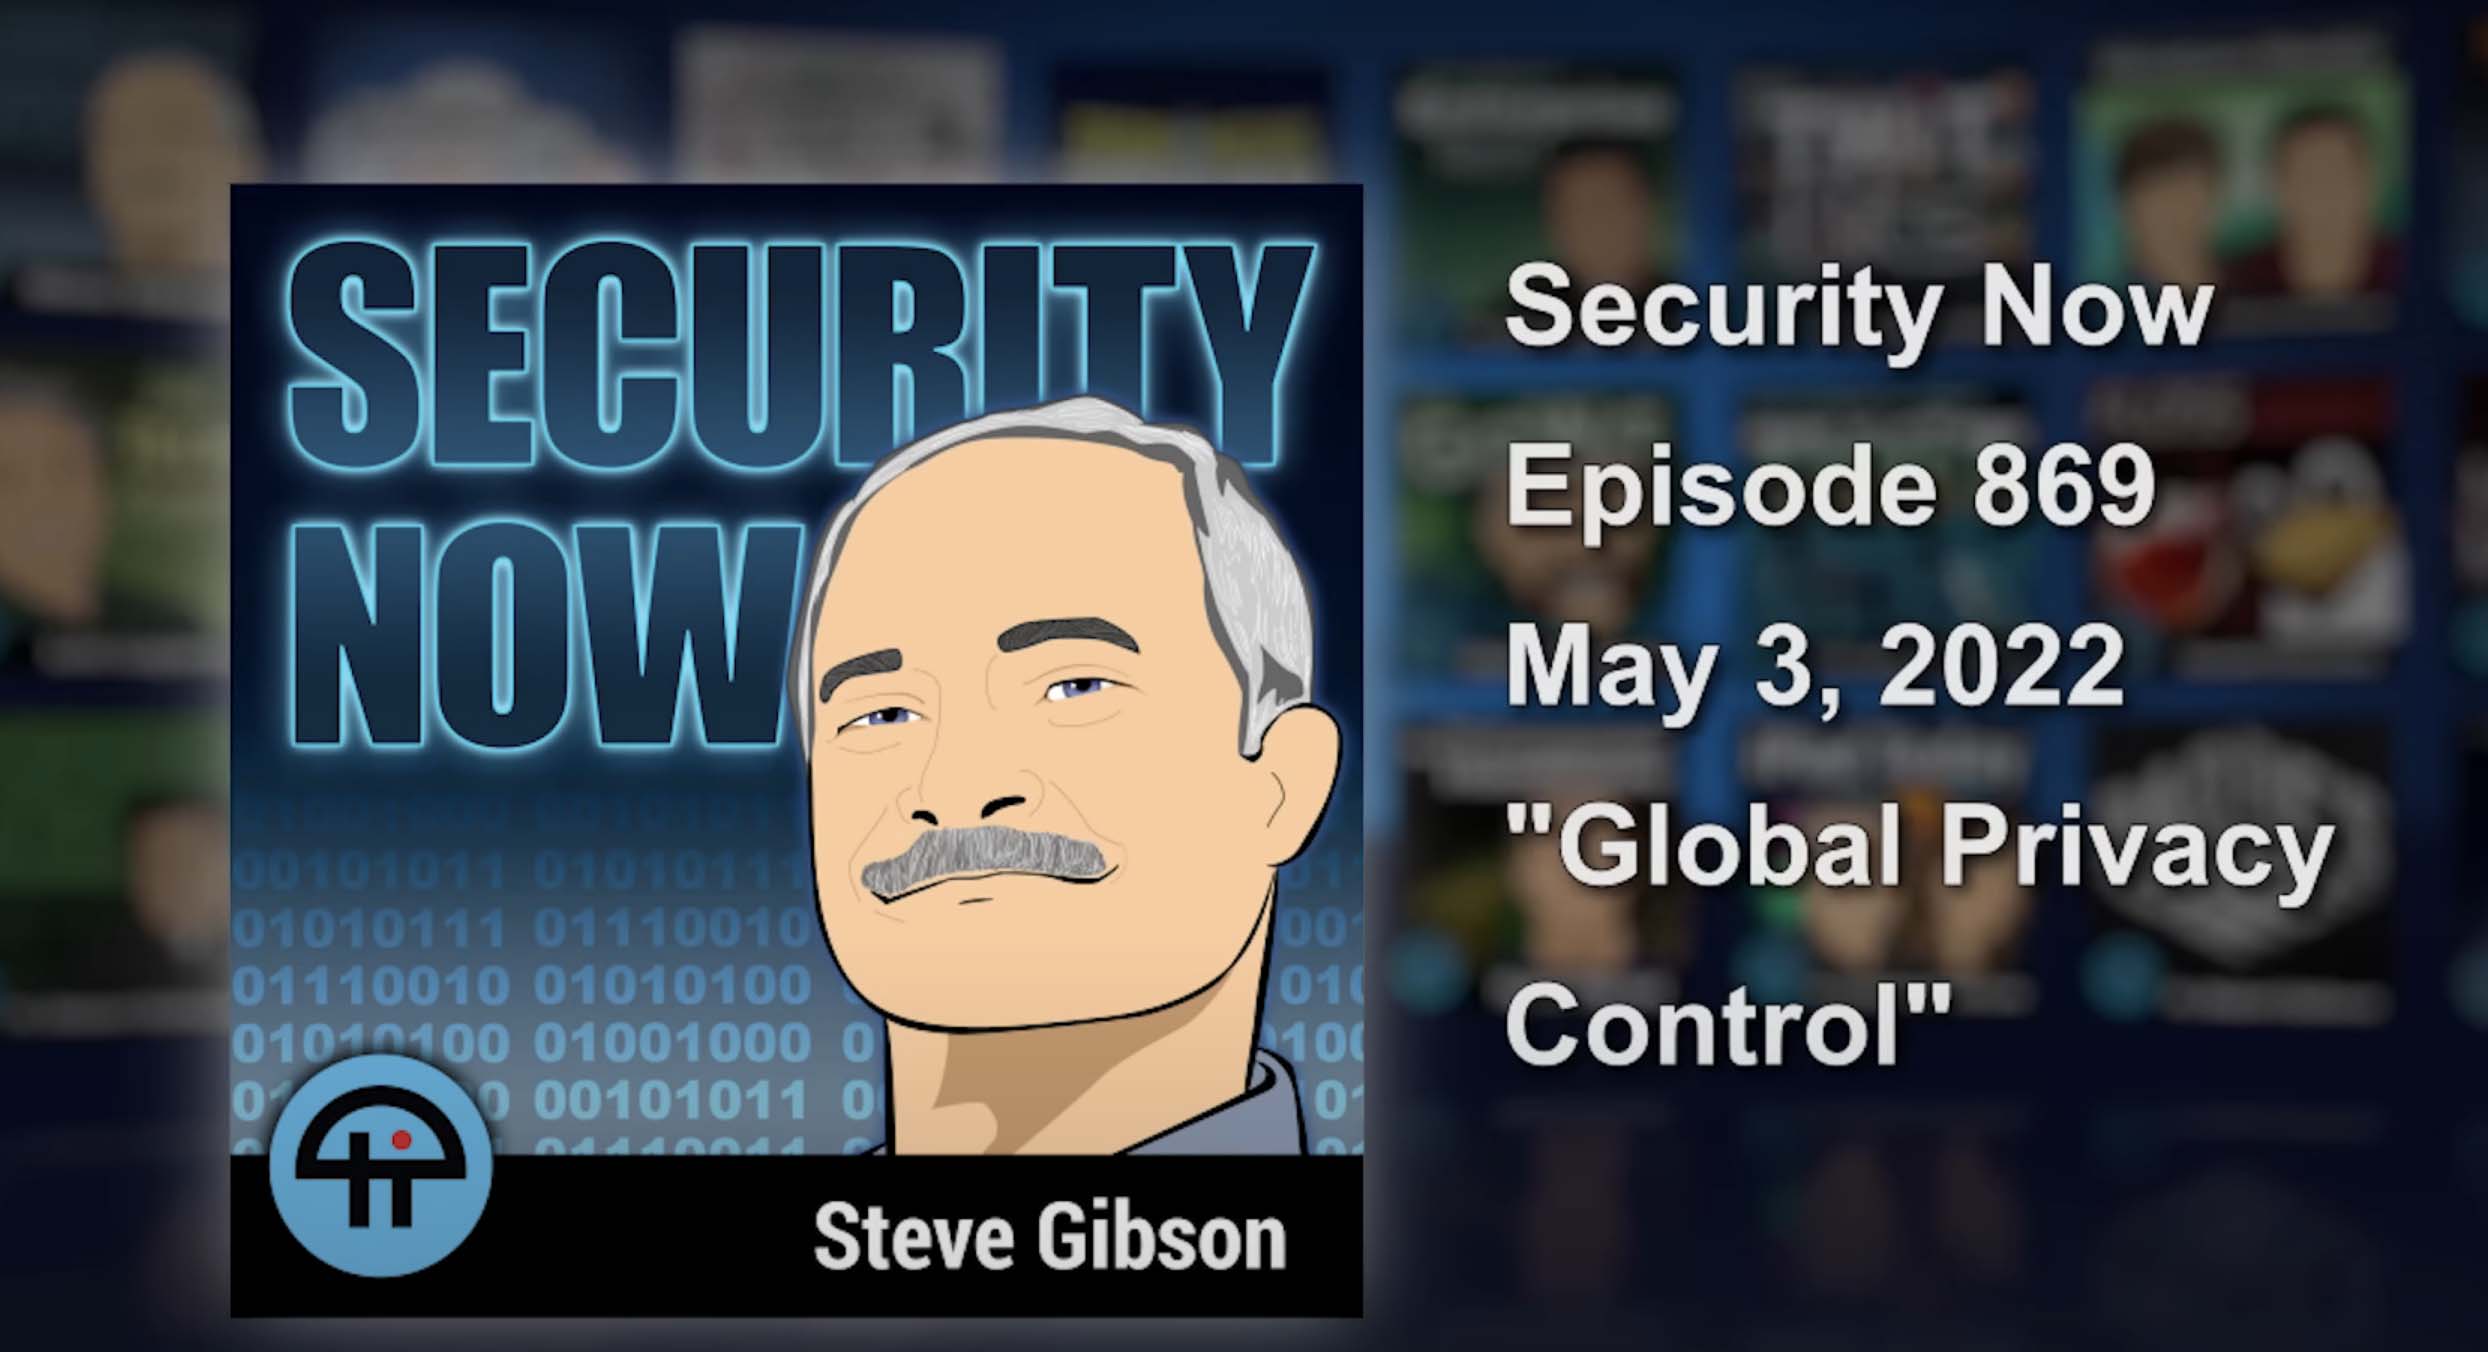 A screenshot of the Security Now YouTube show featuring Global Privacy Control in episode 869.